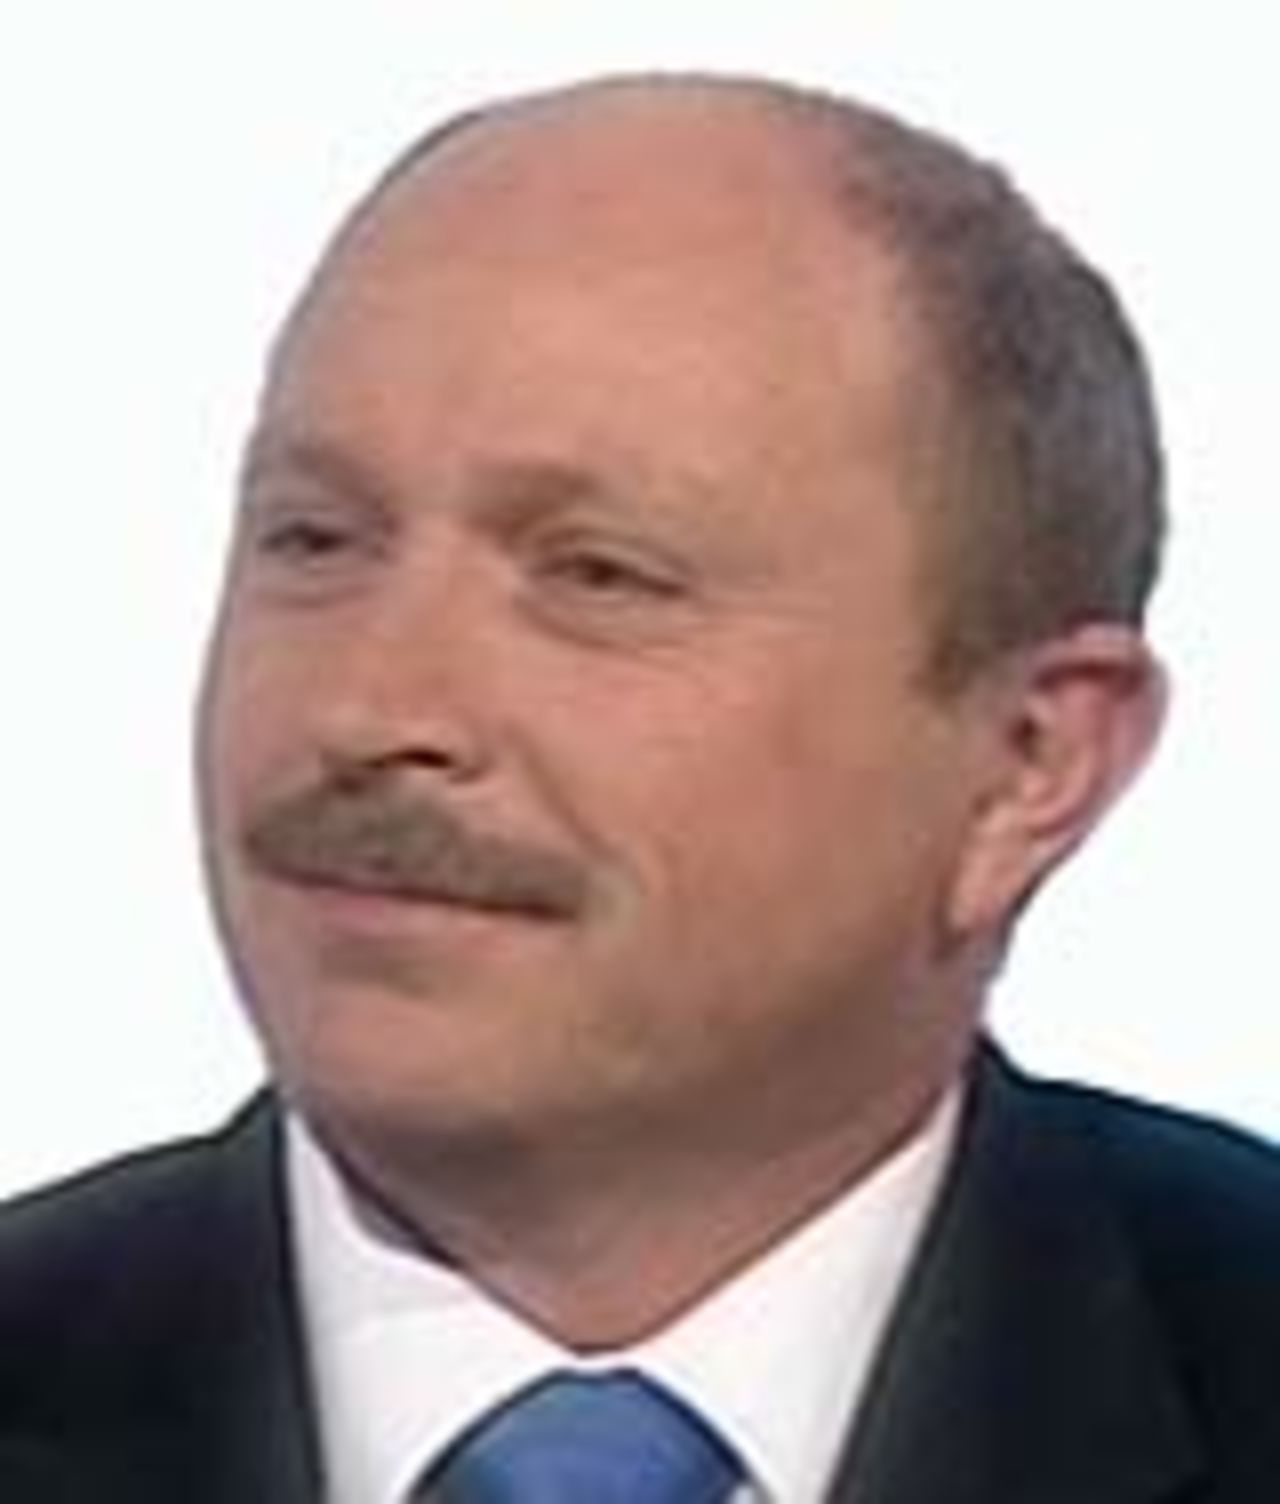 Dave Houghton in TV analyst mode